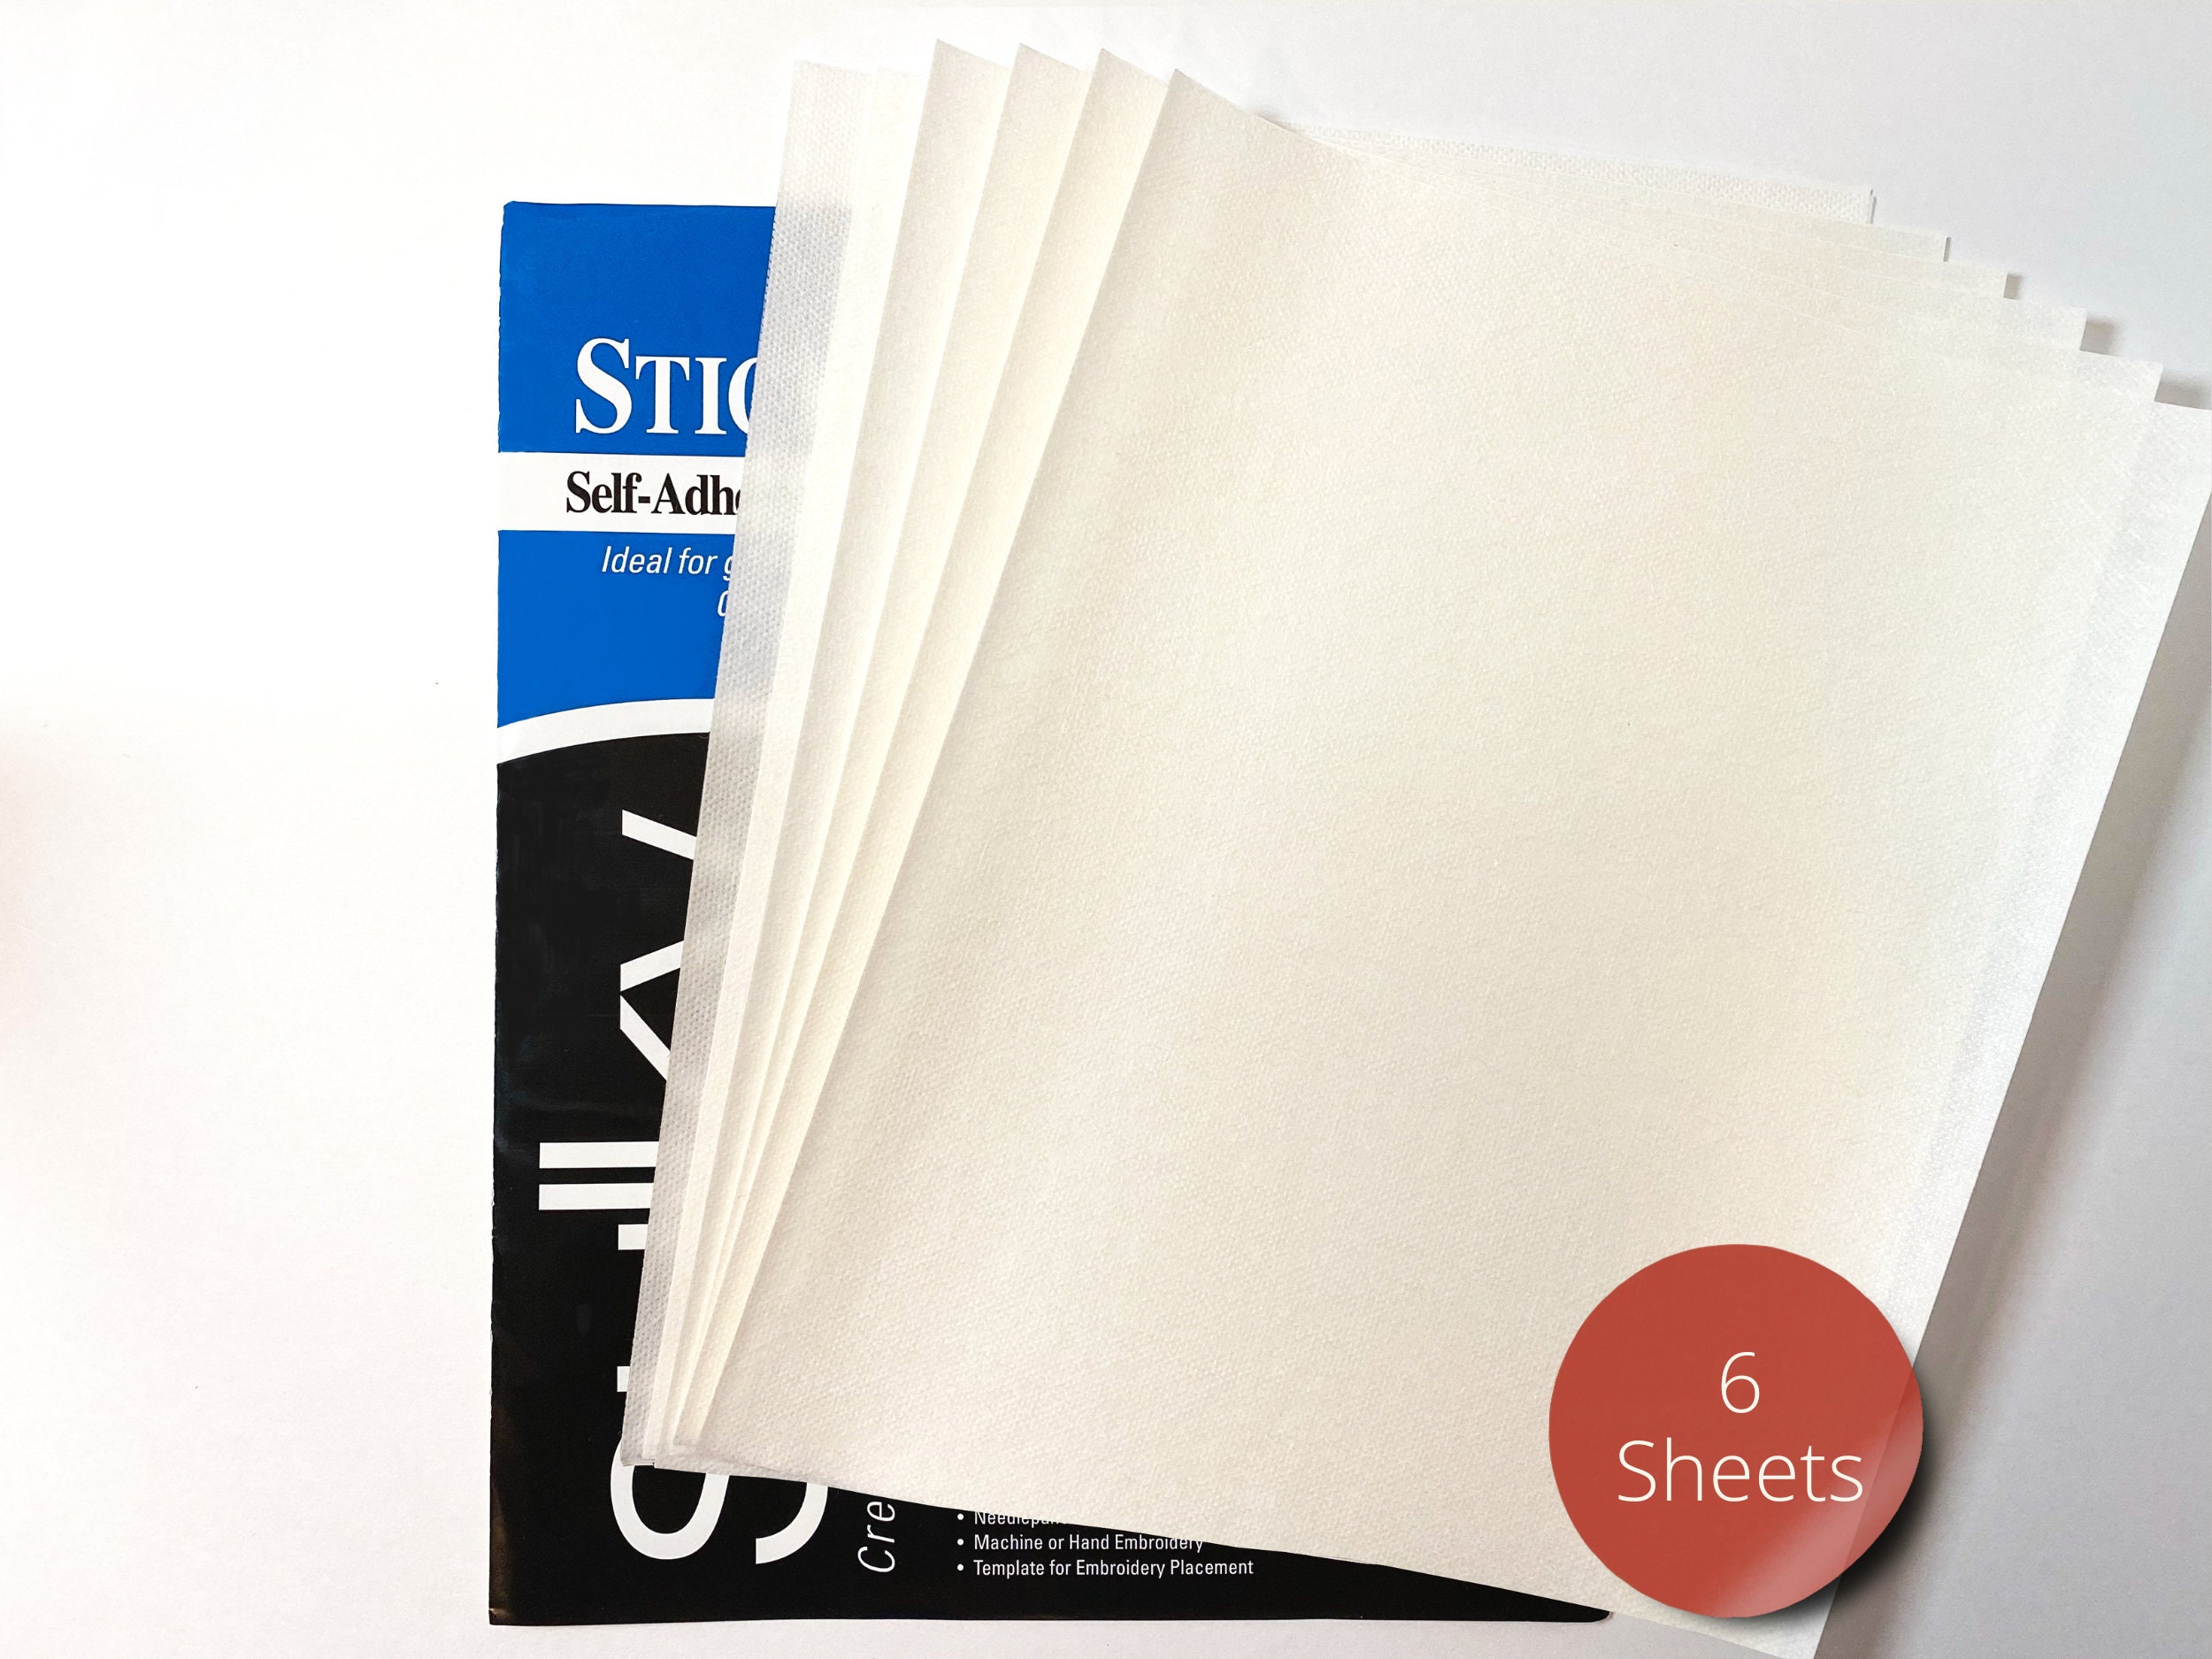 Sulky Paper Solvy - Printable Soluble Stabilizer